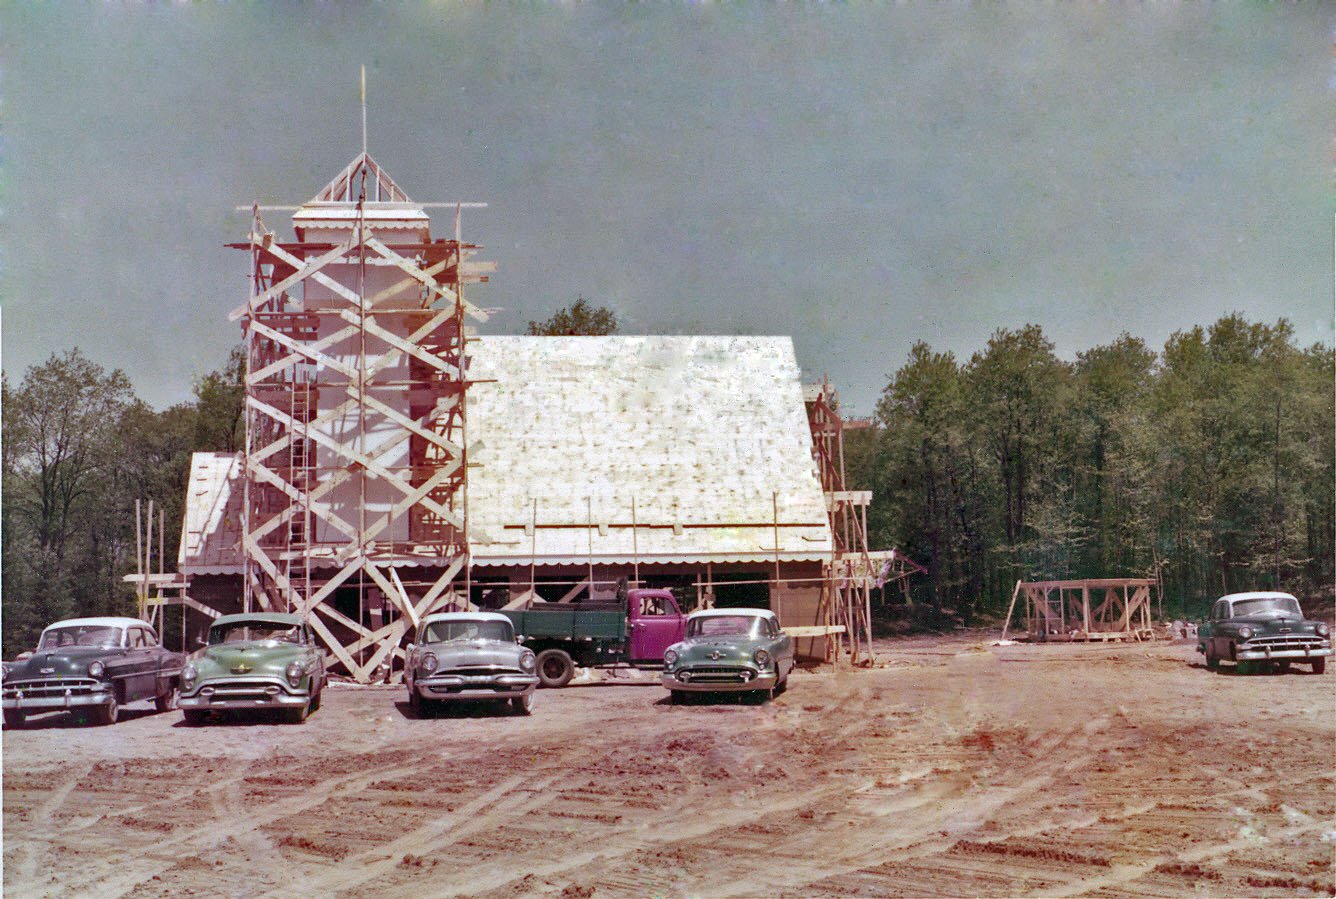 Old Photo of the construction of the entrance to water safari.